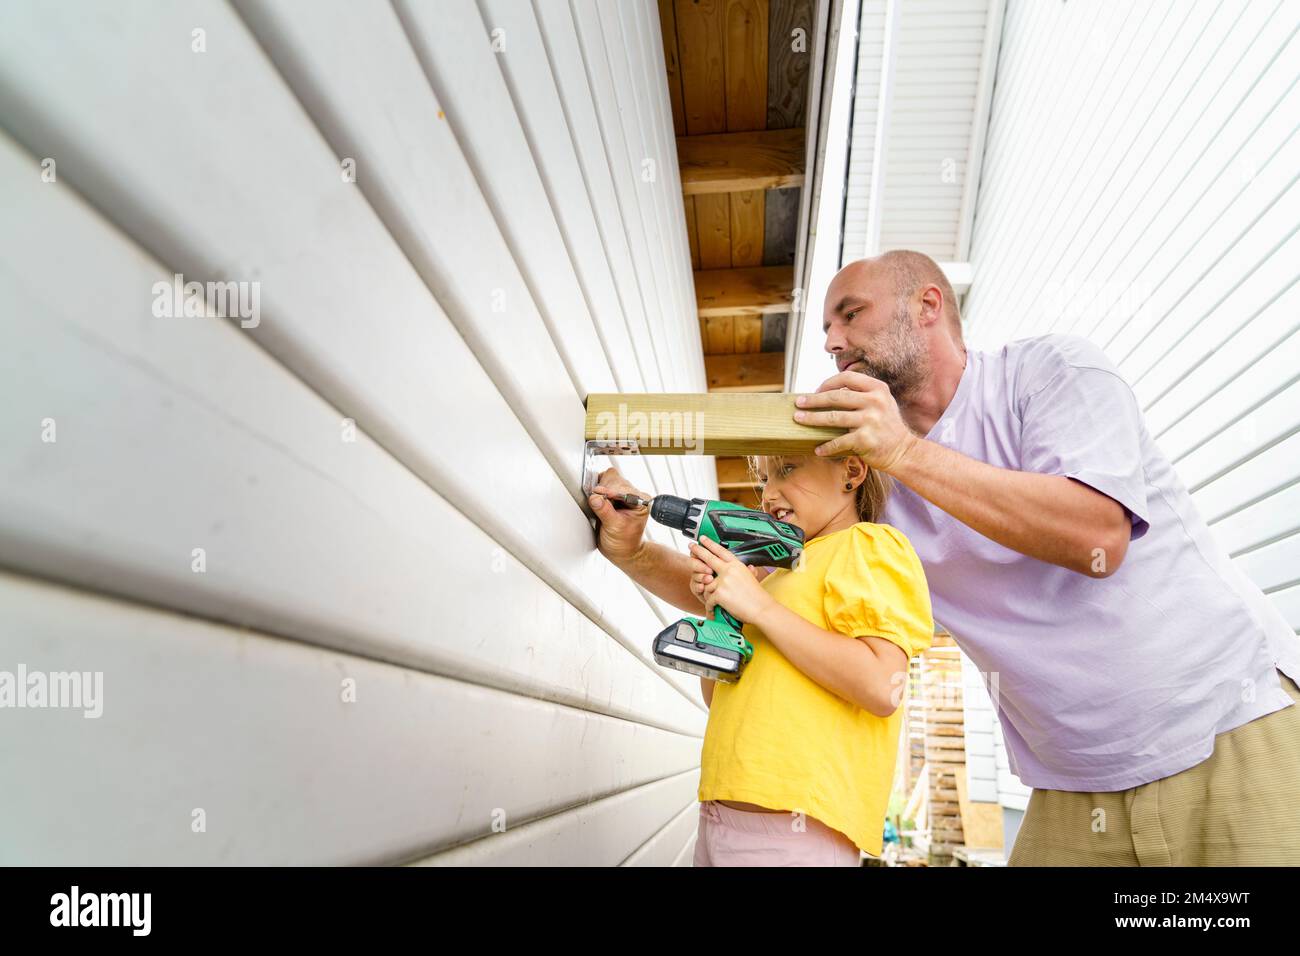 Father teaching daughter to build wooden wall using drill near house Stock Photo